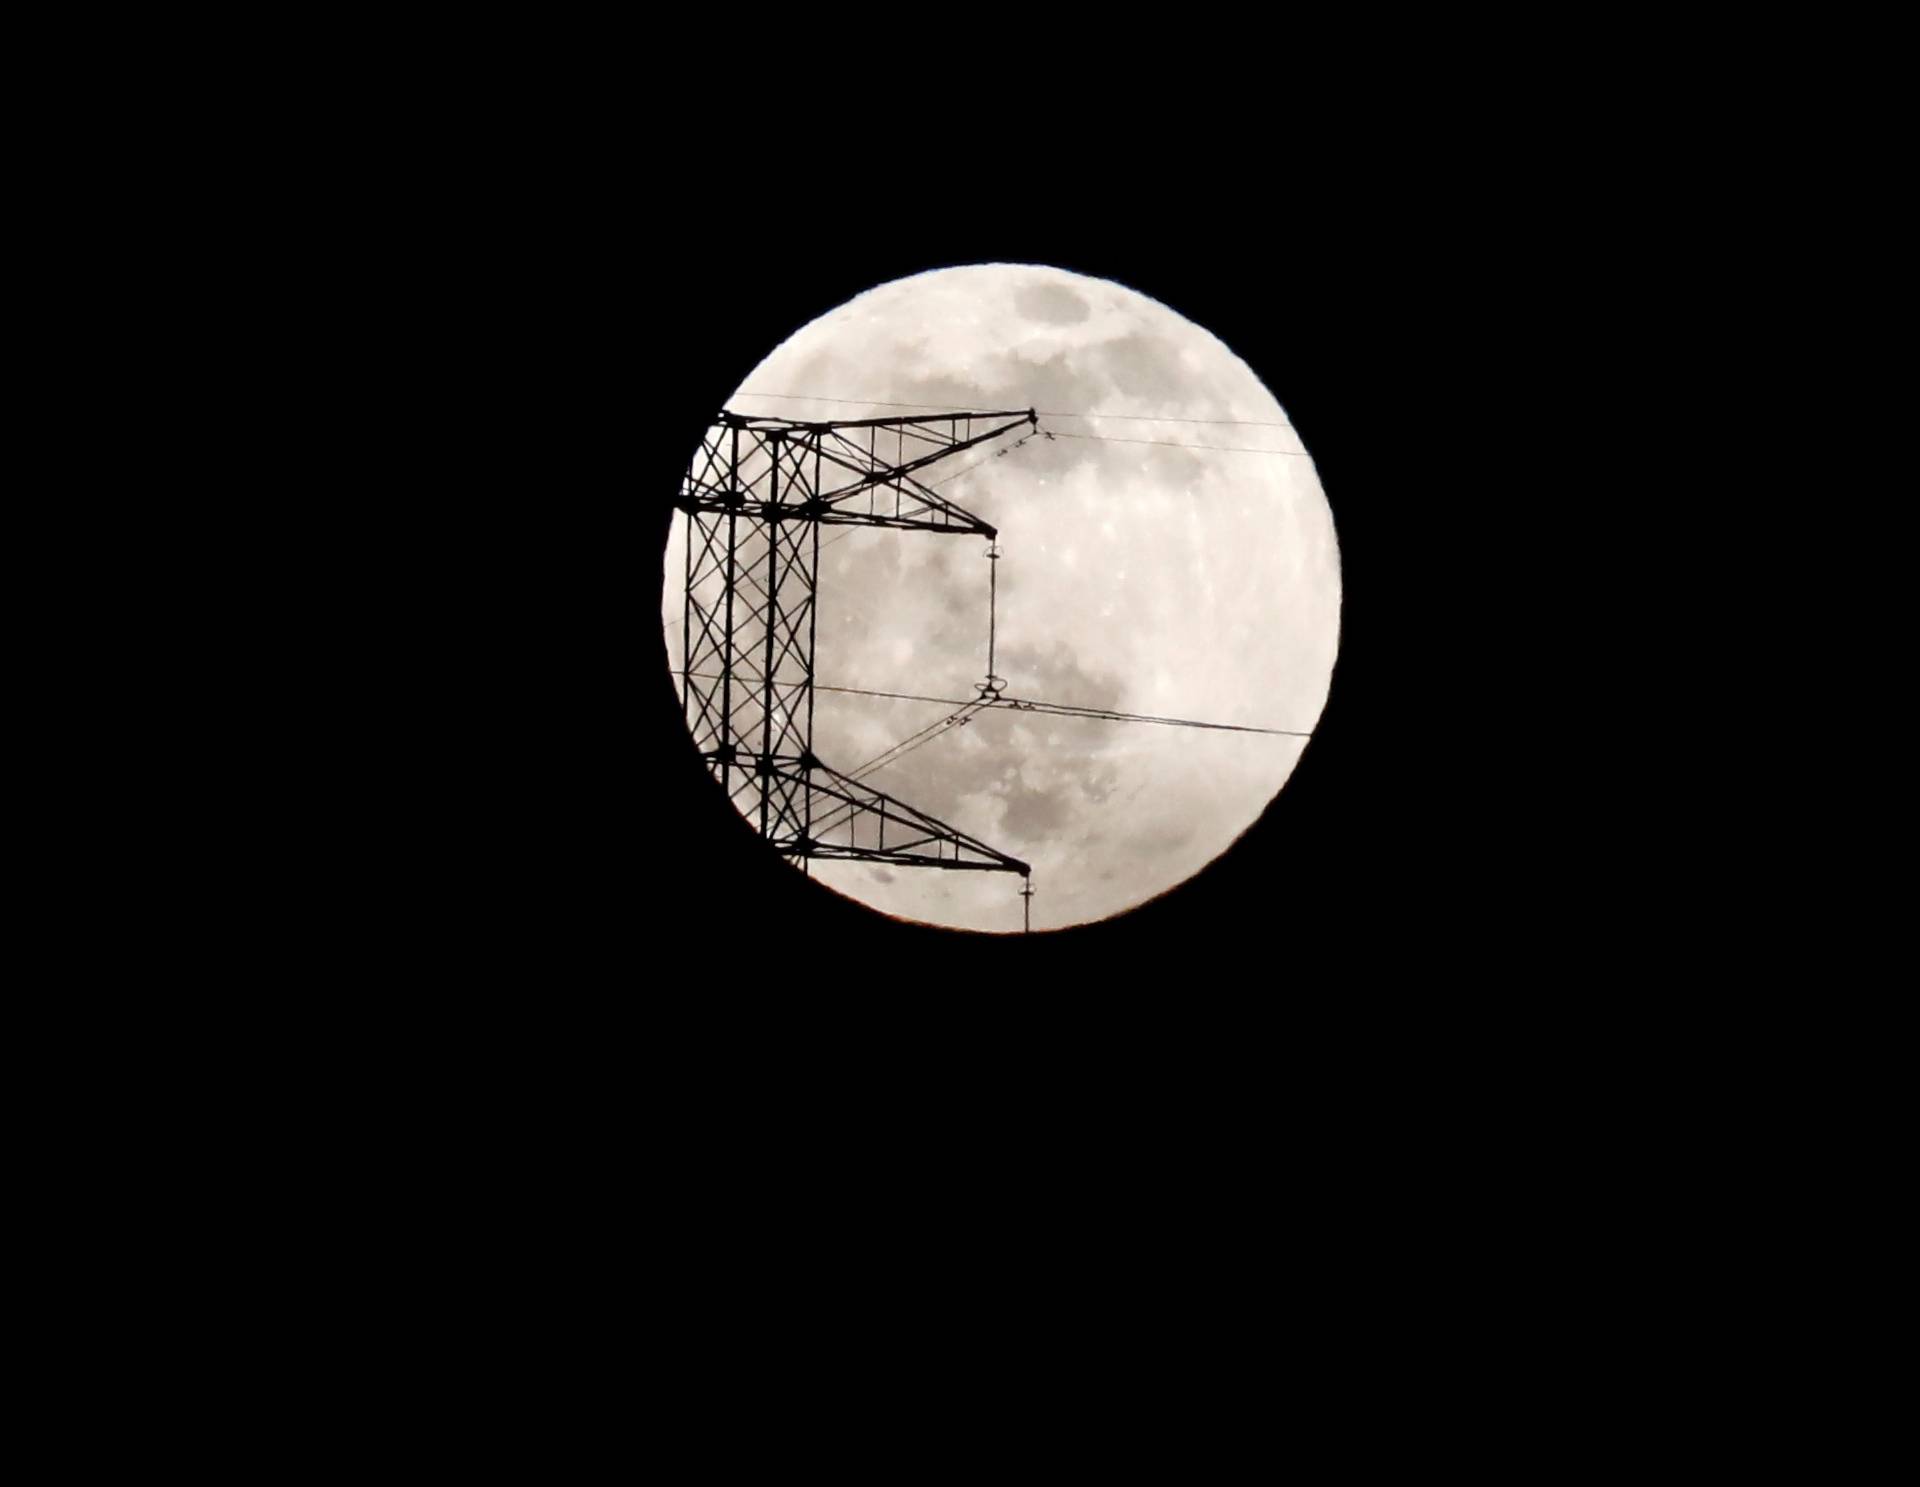 The full moon is seen rising behind an electric tower during the penumbral lunar eclipse in Ronda, near Malaga